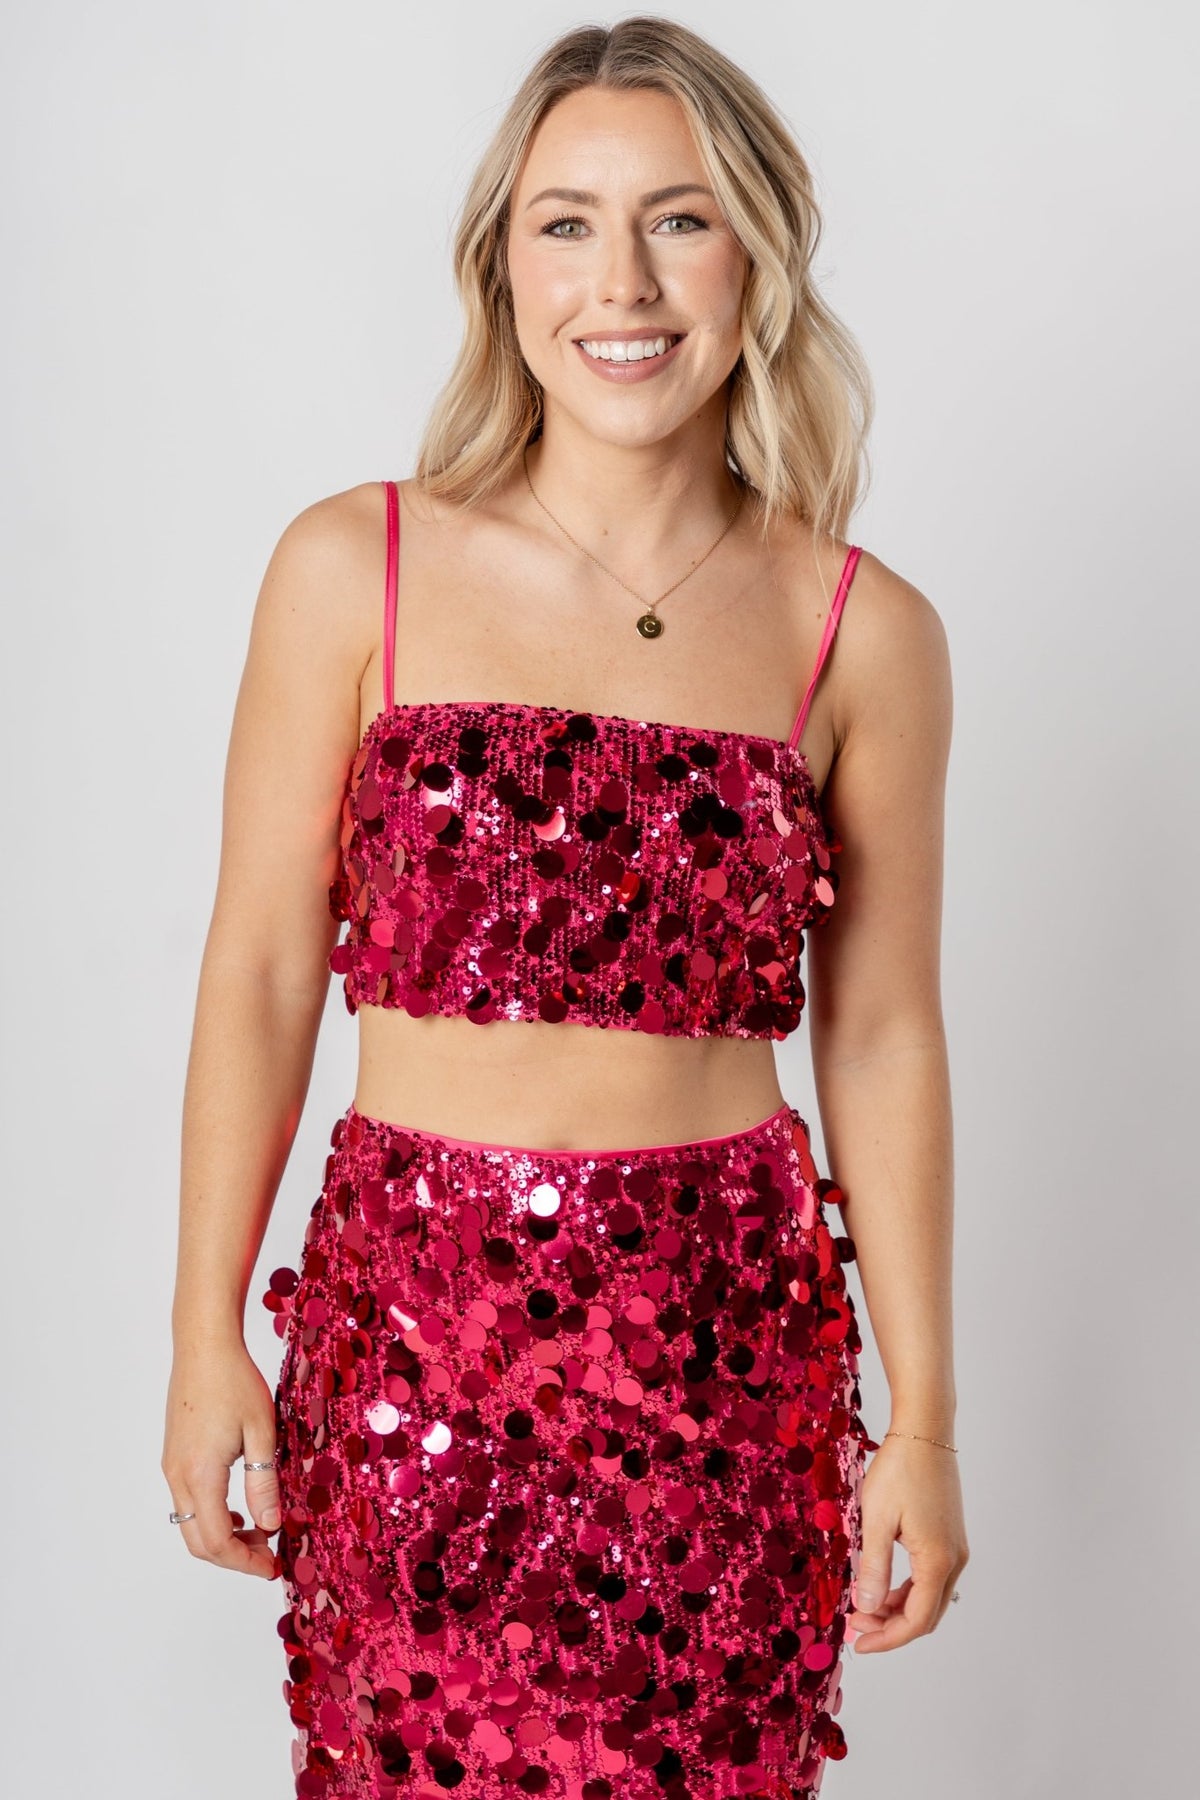 Sequin cami tank top pink - Trendy New Year's Eve Outfits at Lush Fashion Lounge Boutique in Oklahoma City